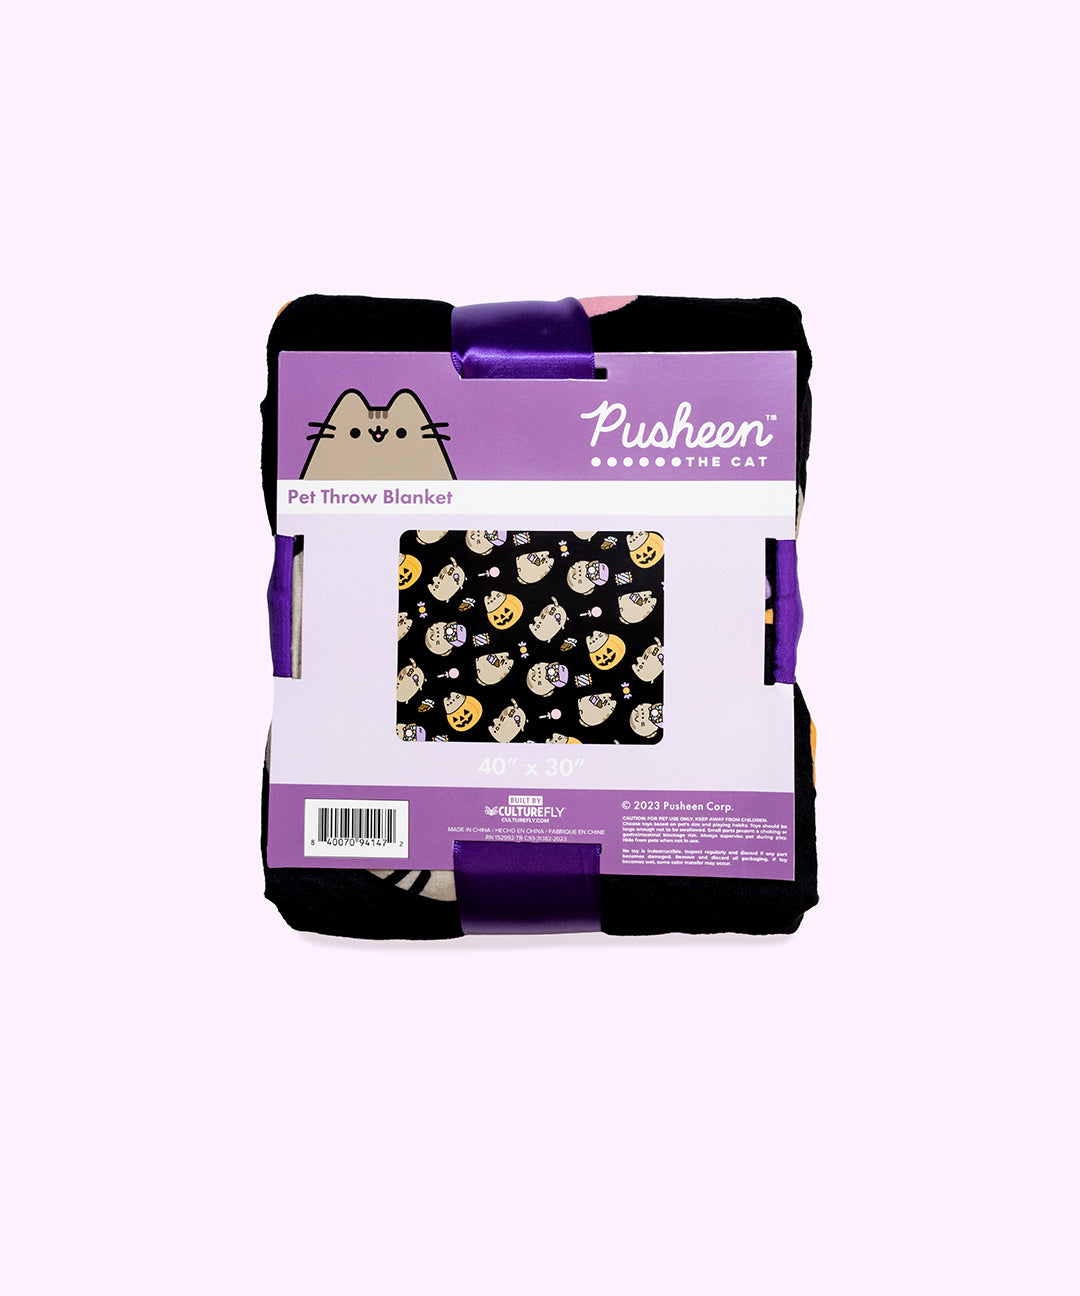 The Halloween blanket is folded inside its packaging which states that it is a “Pet Throw Blanket.” The packaged black blanket sits in front of a light purple background. 